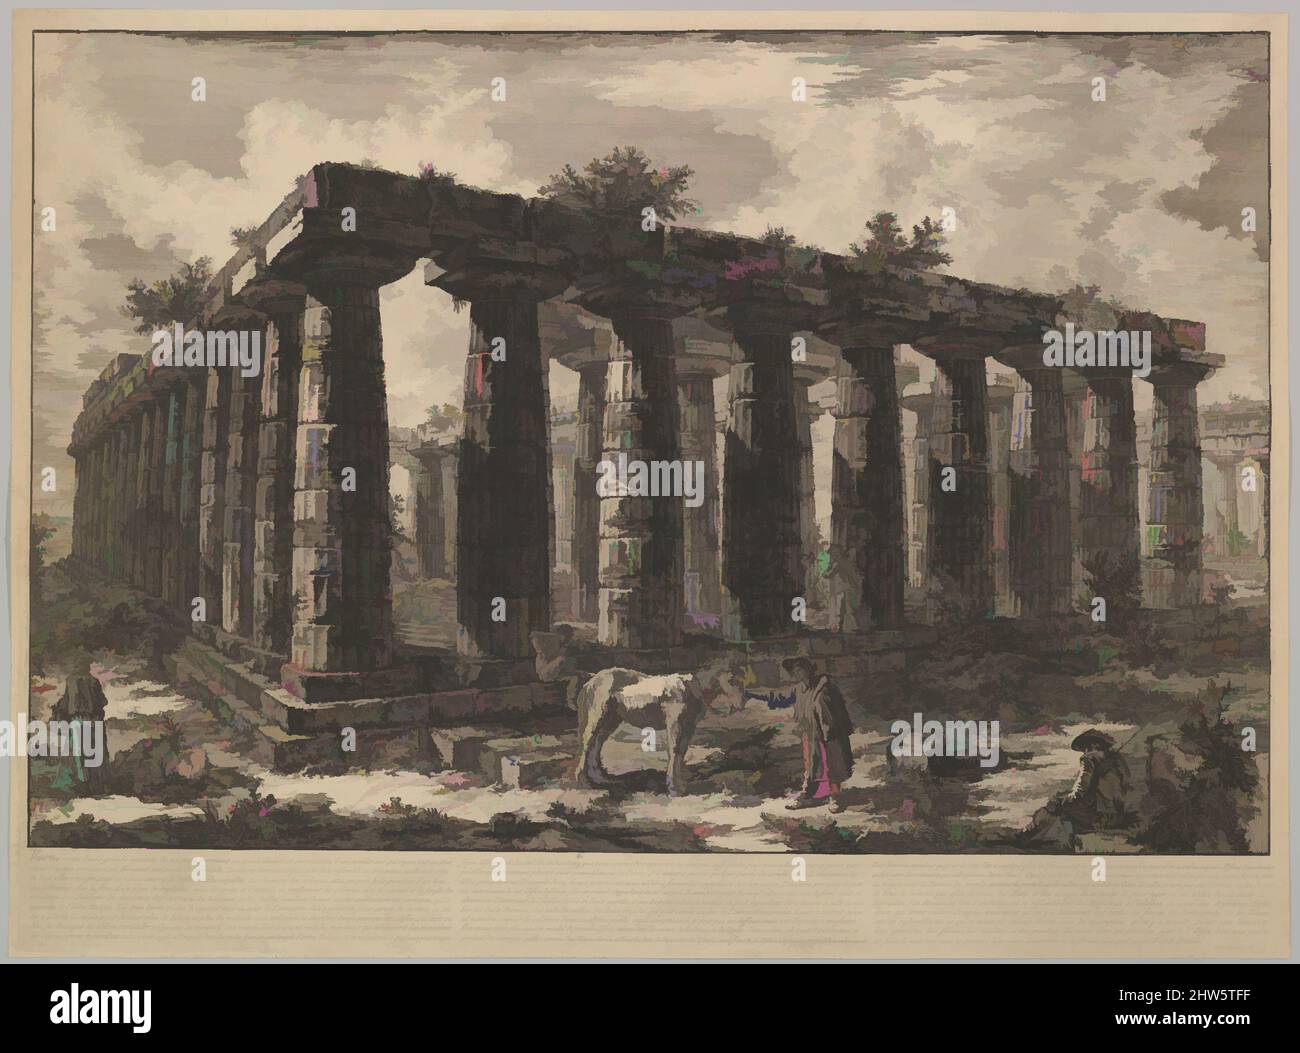 Art inspired by View showing the remains of a large enclosure of columns..., from Différentes vues de quelques Restes de trois grands Edifices qui subsistent encore dans le milieu de l'ancienne Ville de Pesto autrement Posidonia qui est située dans la Lucanie (Different views of some, Classic works modernized by Artotop with a splash of modernity. Shapes, color and value, eye-catching visual impact on art. Emotions through freedom of artworks in a contemporary way. A timeless message pursuing a wildly creative new direction. Artists turning to the digital medium and creating the Artotop NFT Stock Photo